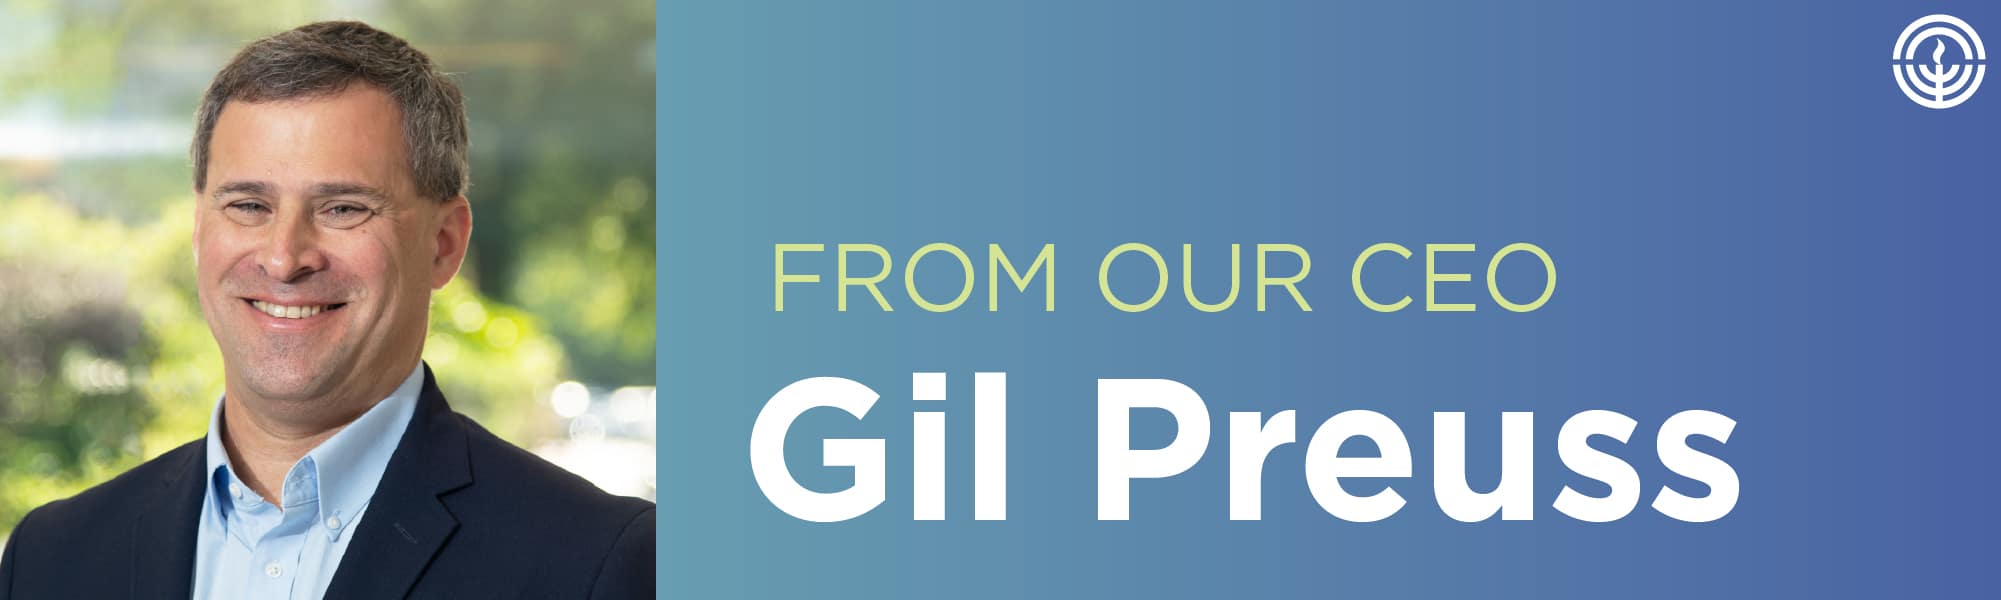 Weekly Reflection – October 4, 2019: A Message from Gil Preuss